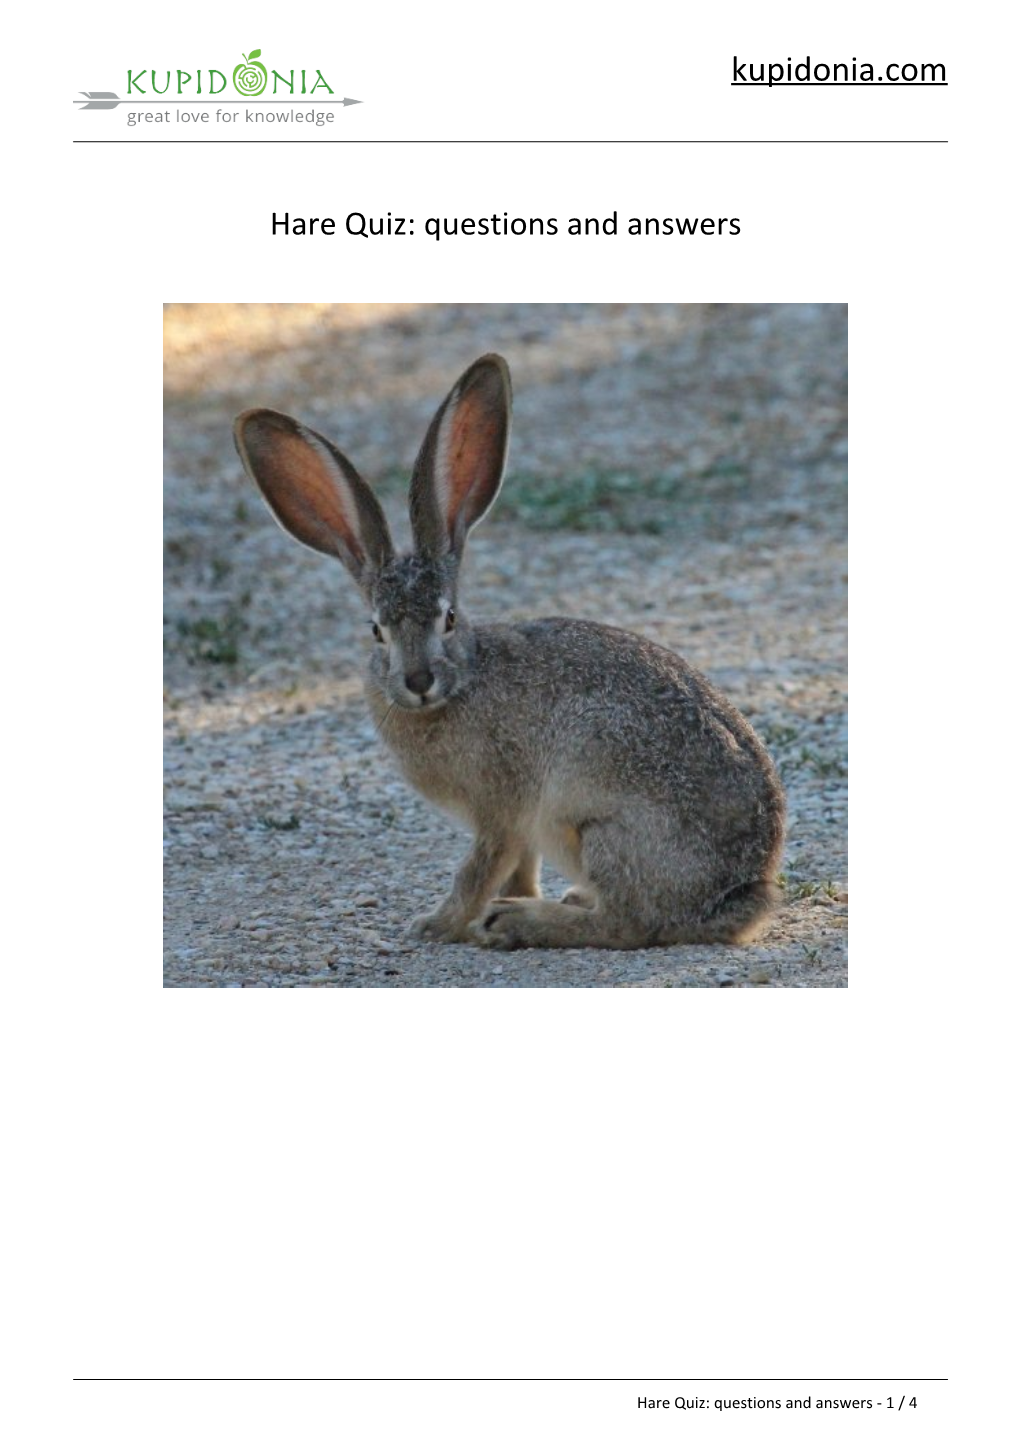 Hare Quiz: Questions and Answers